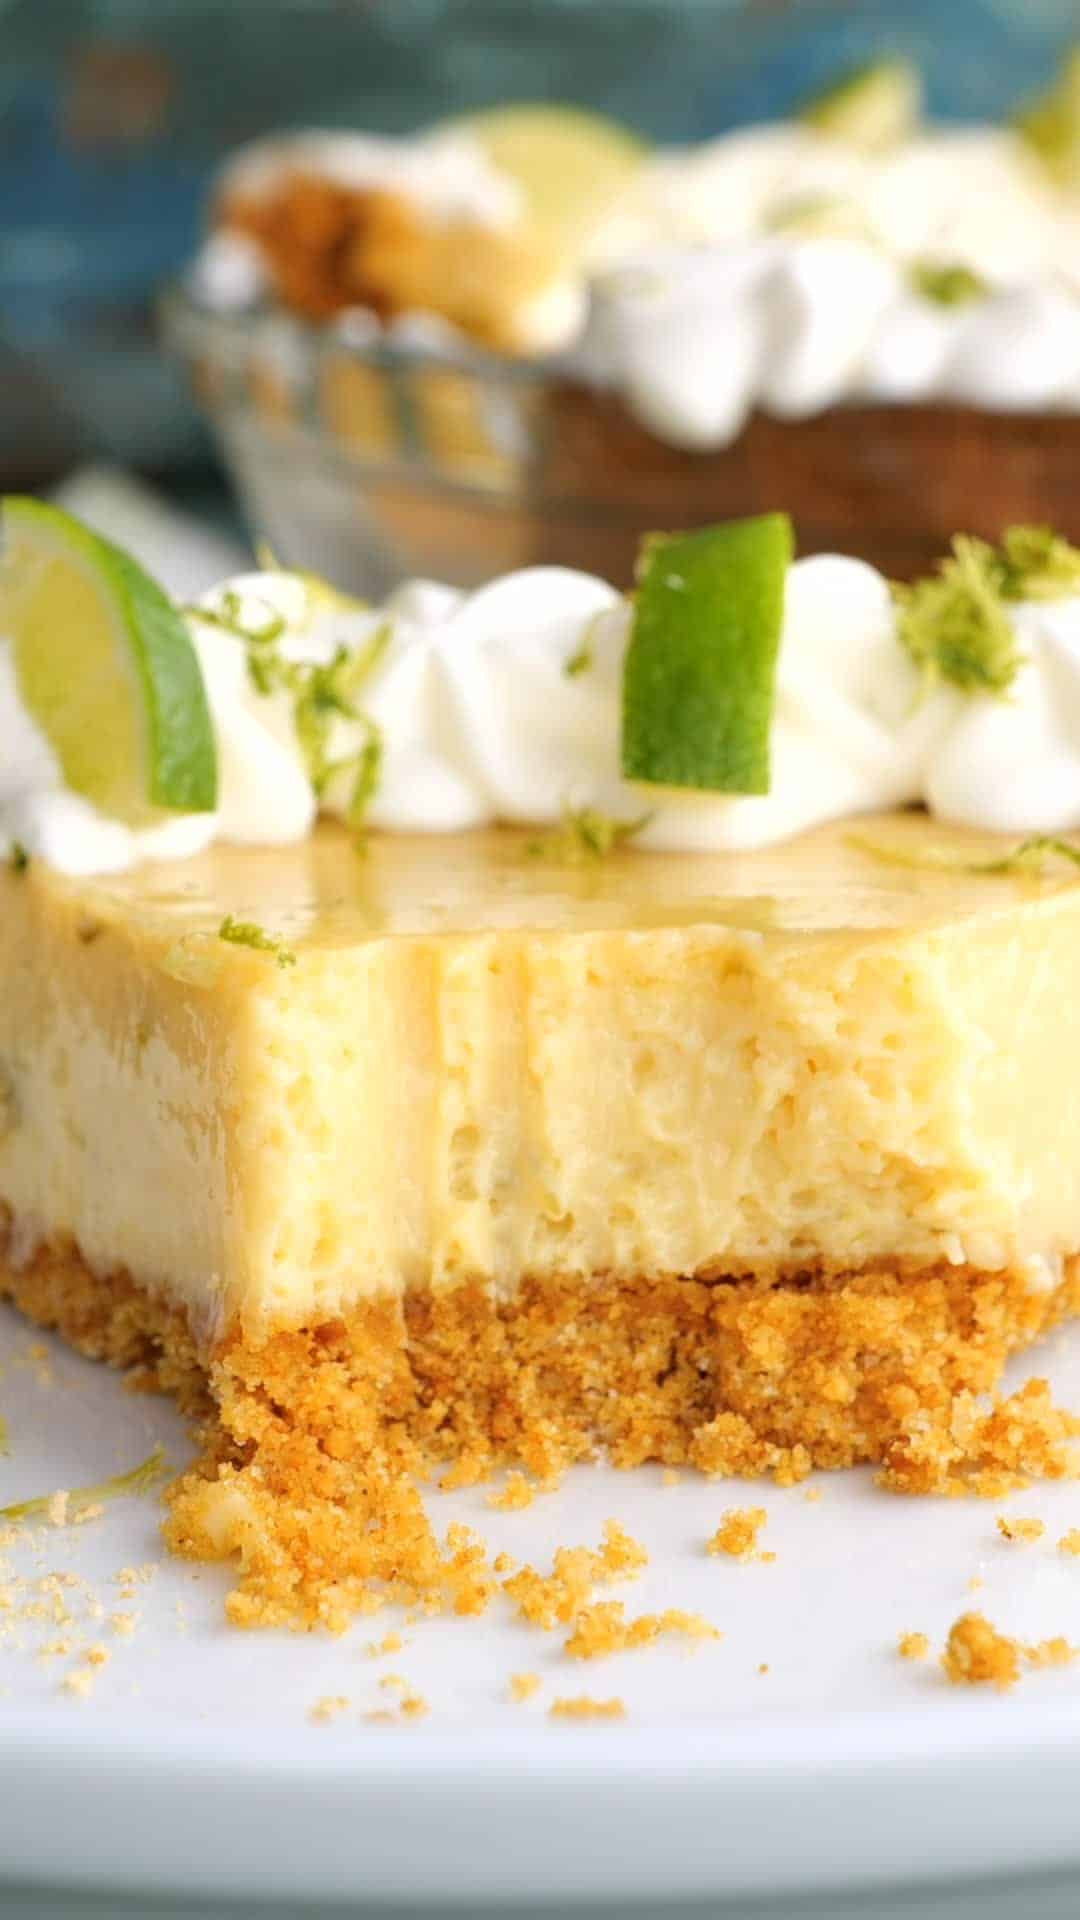 Key lime pie with a forkful taken out to reveal the creamy center and graham cracker crust